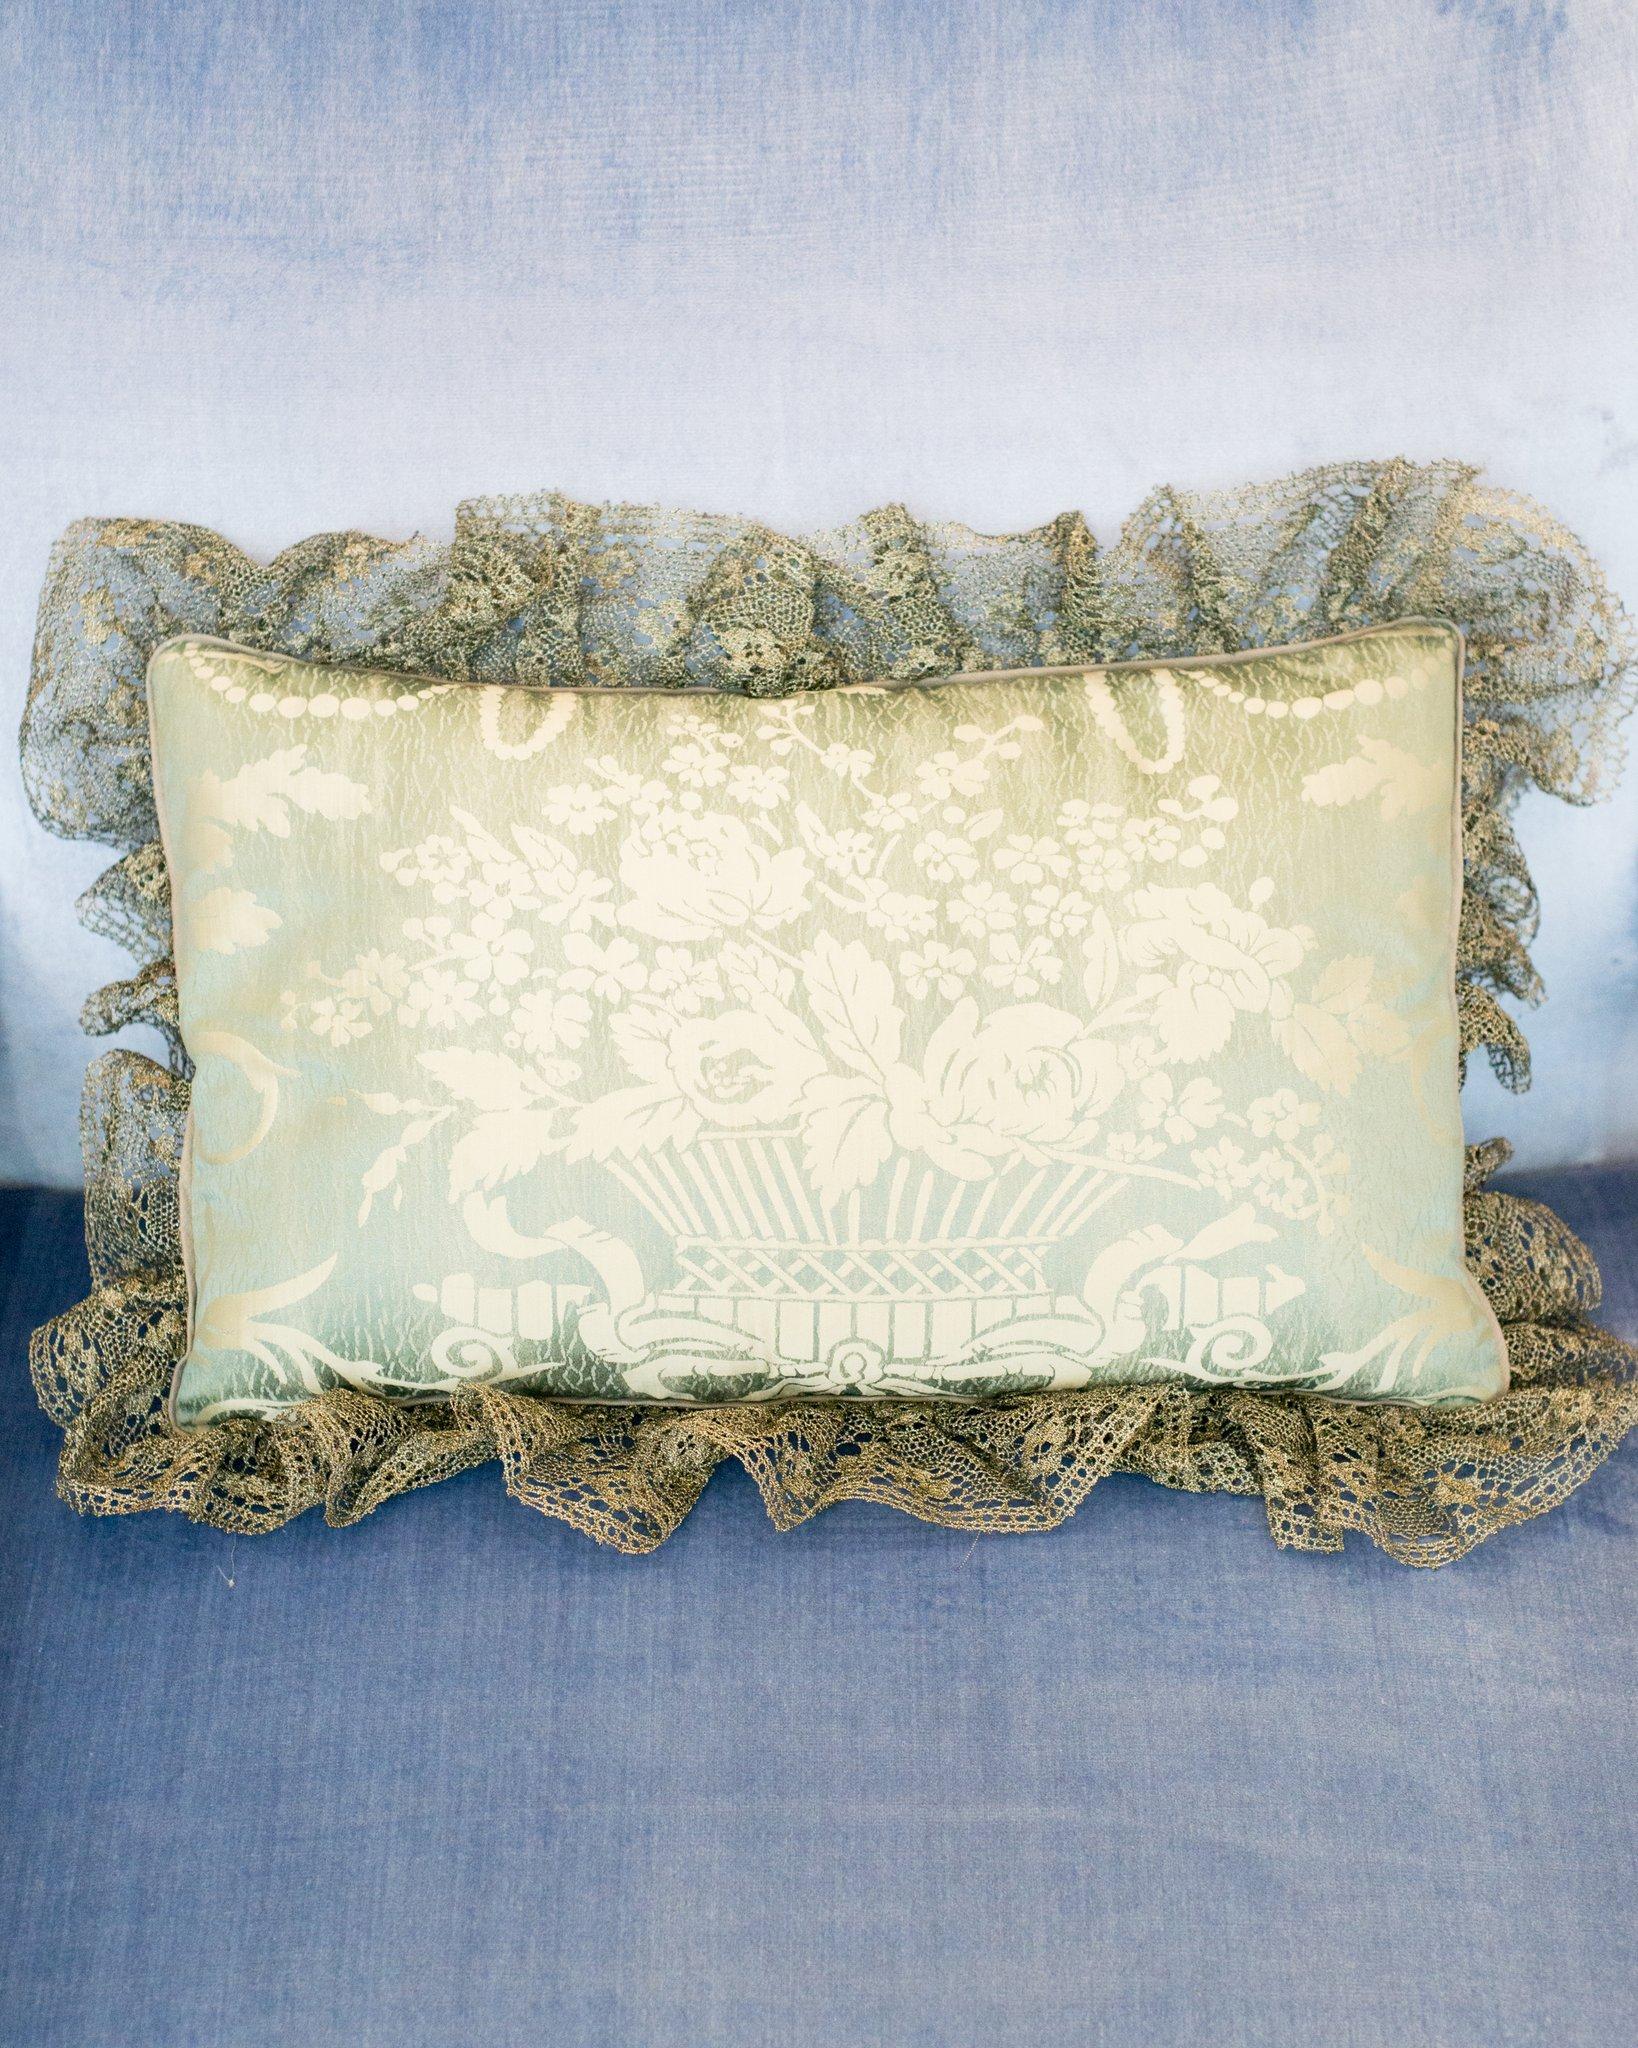 Canadian Contemporary Asymmetric Pair of Pale Blue Silk Damask Pillows with Metallic Lace